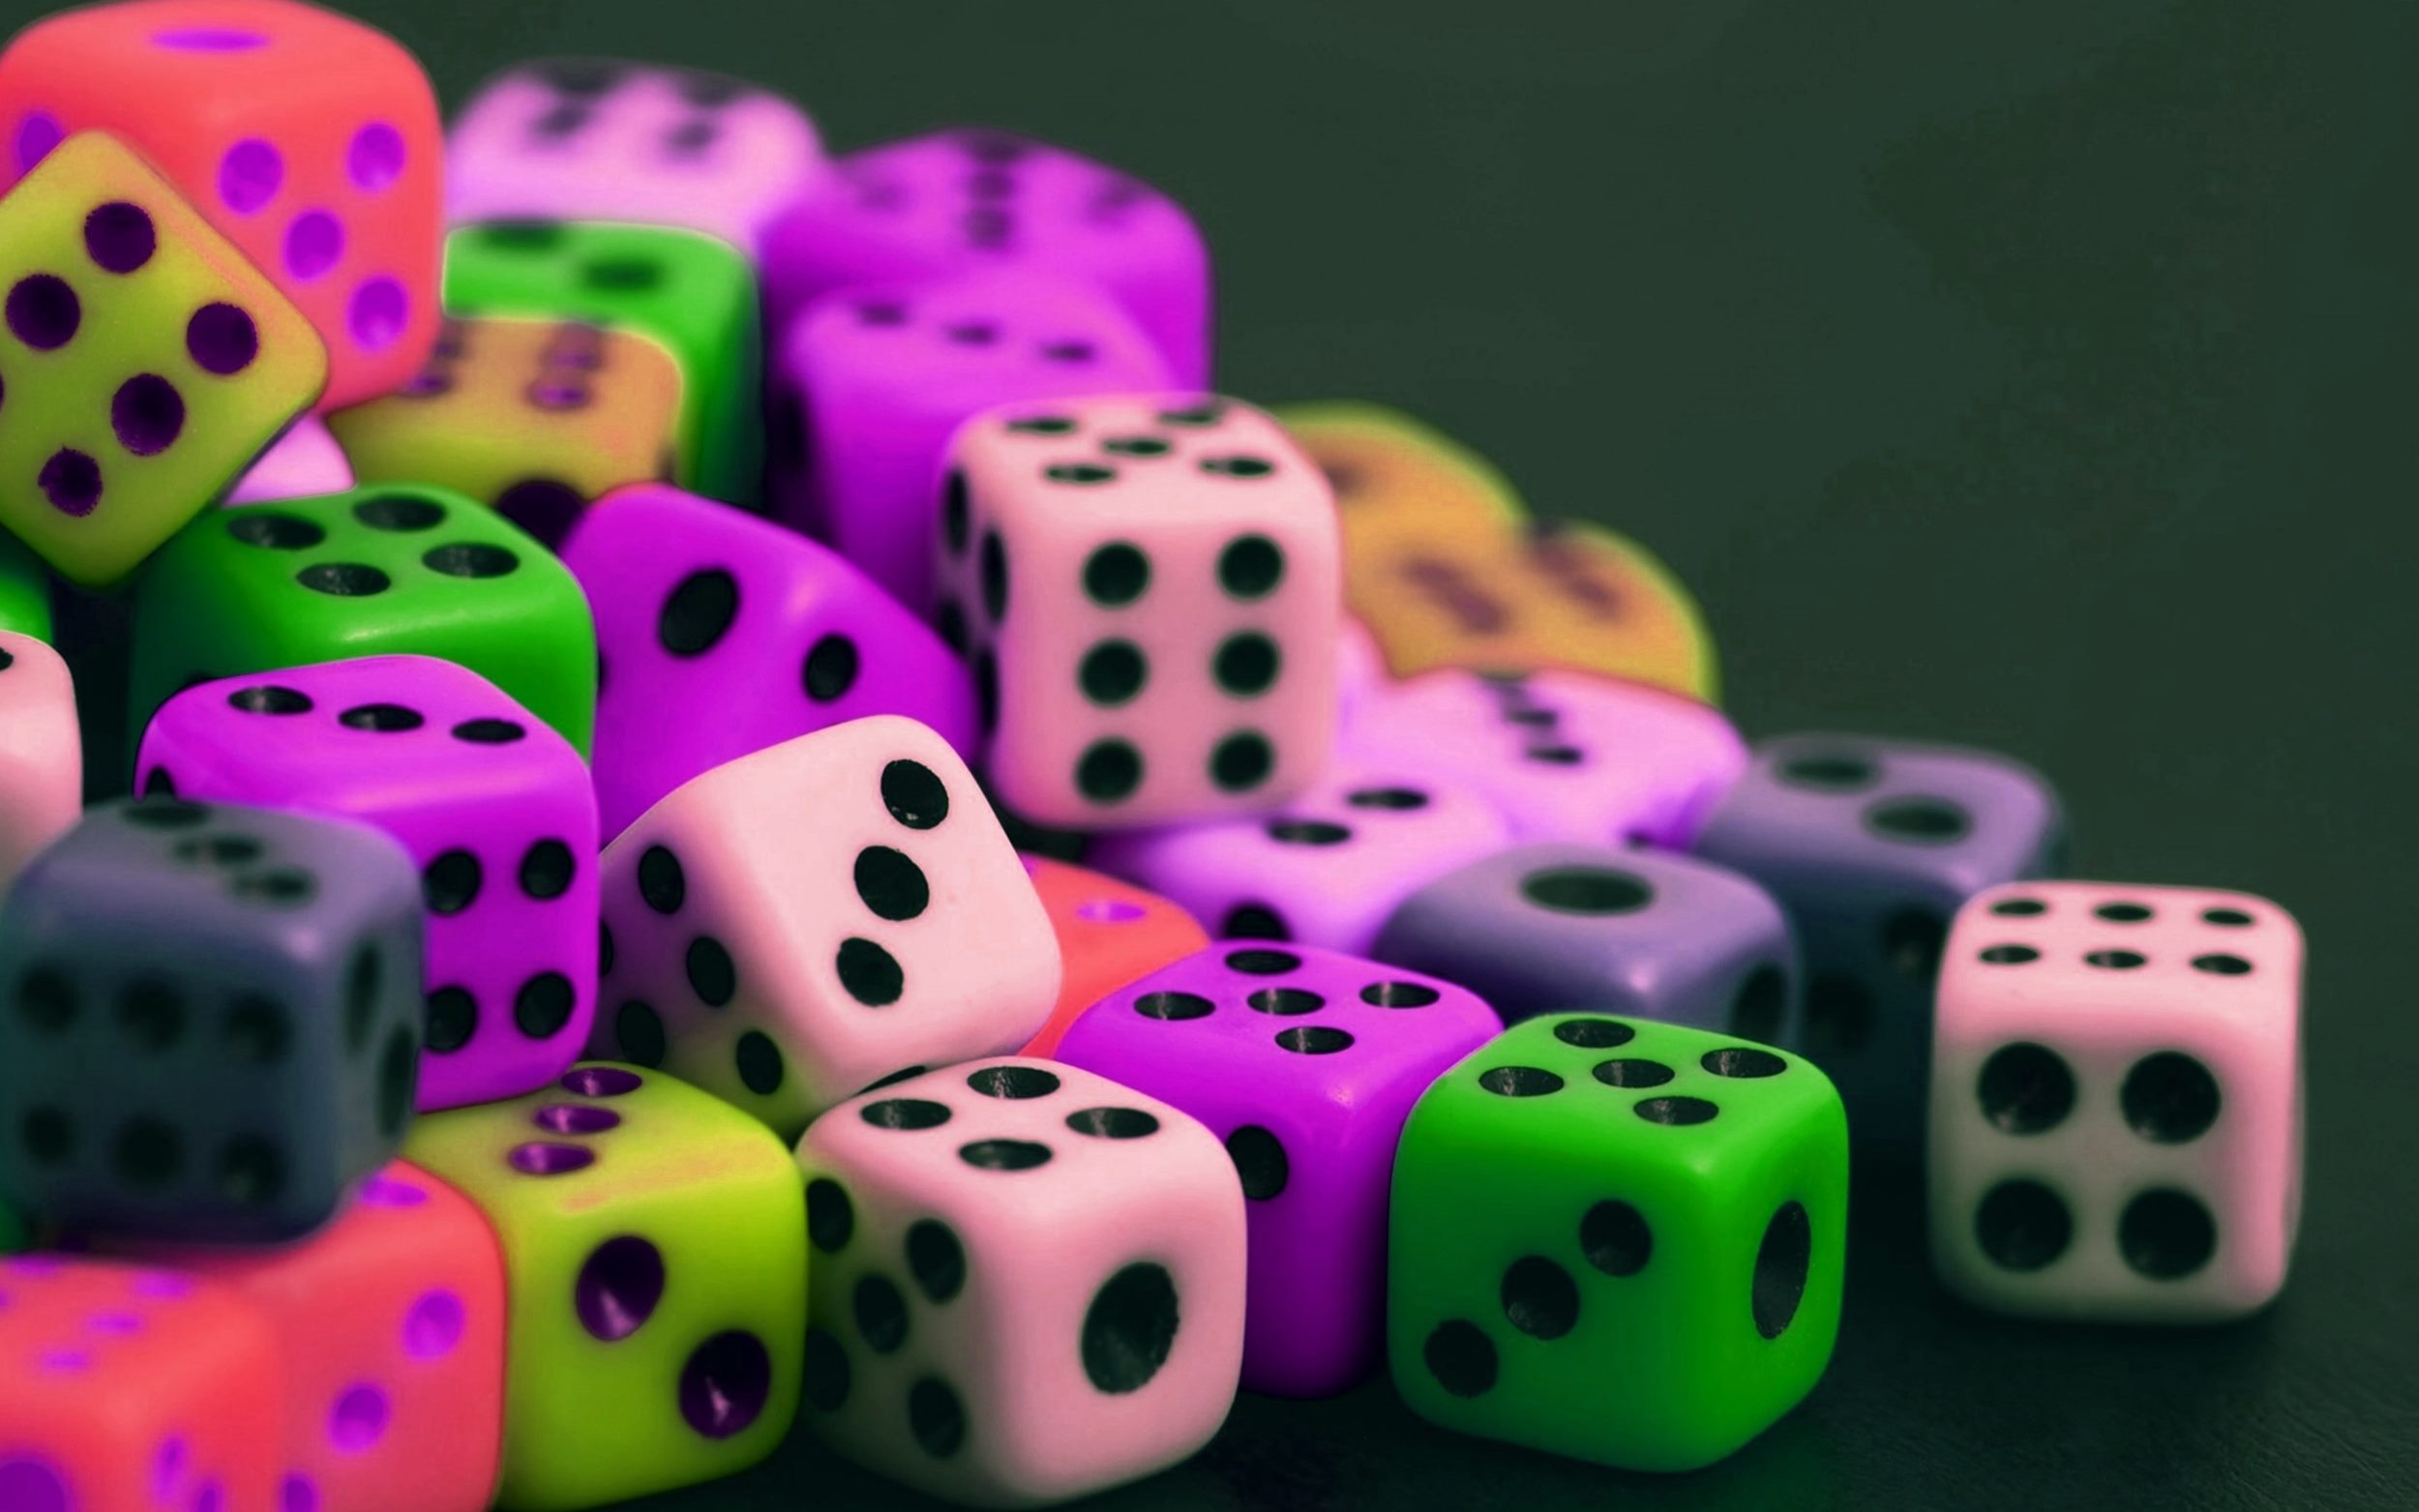 Wallpaper ID: 615241 / competition, fun, luck, numbers, indoors, pattern,  ludo, close-up, business, challenge, yellow, full frame, chance, game,  large group of objects, multi colored Wallpaper